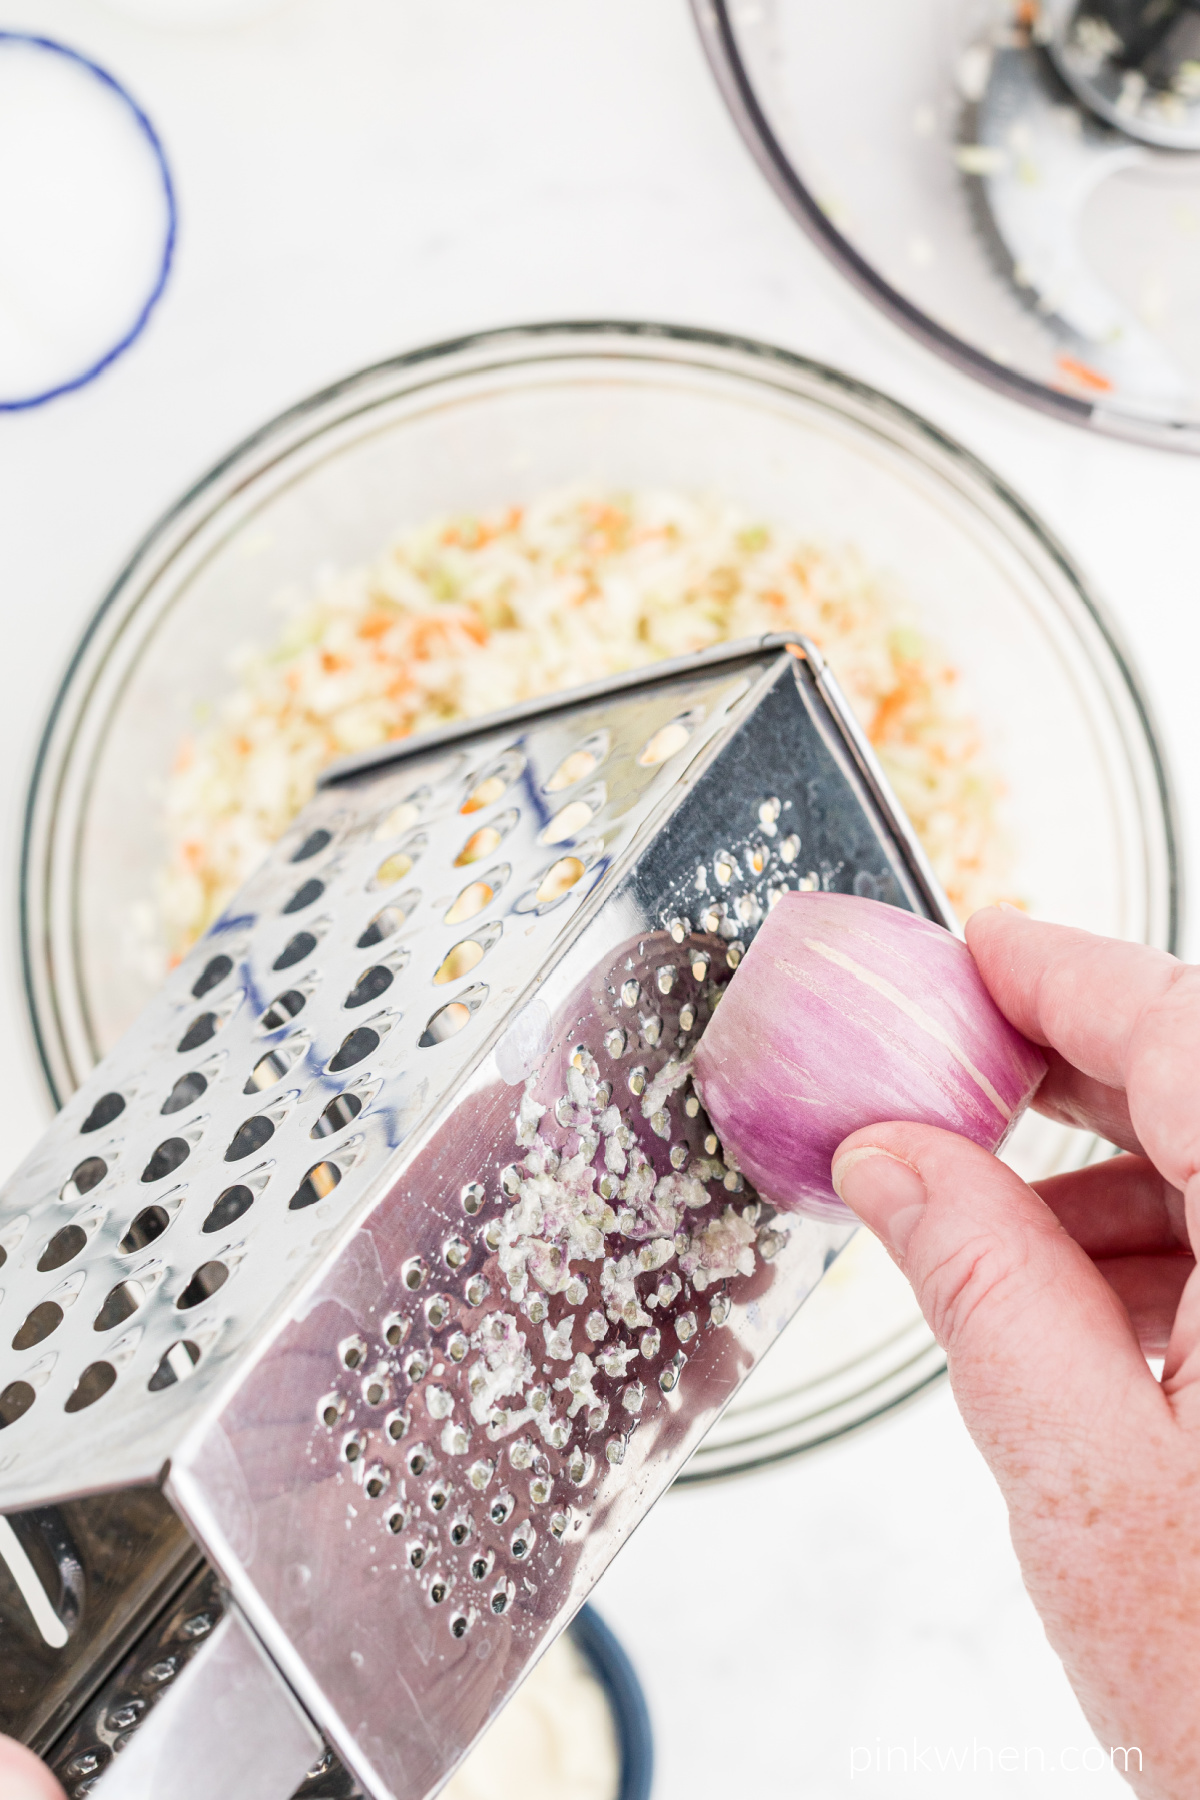 Grating of the shallot into the coleslaw mixture.